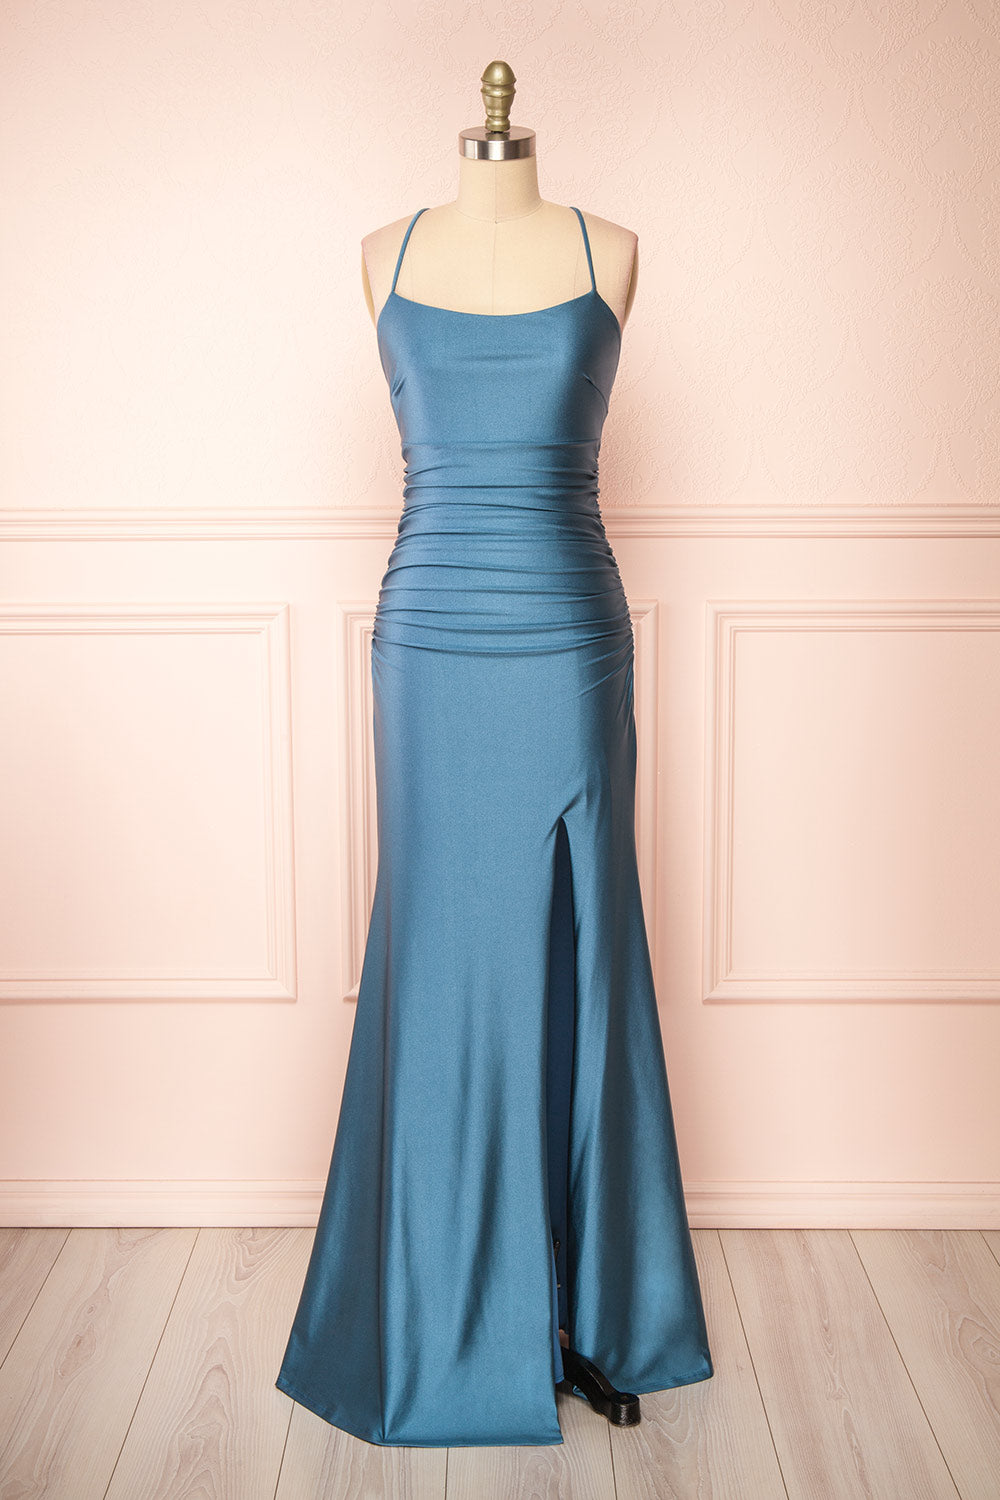 Sonia Blue Grey Backless Mermaid Maxi Dress w/ Slit | Boutique 1861 front view 